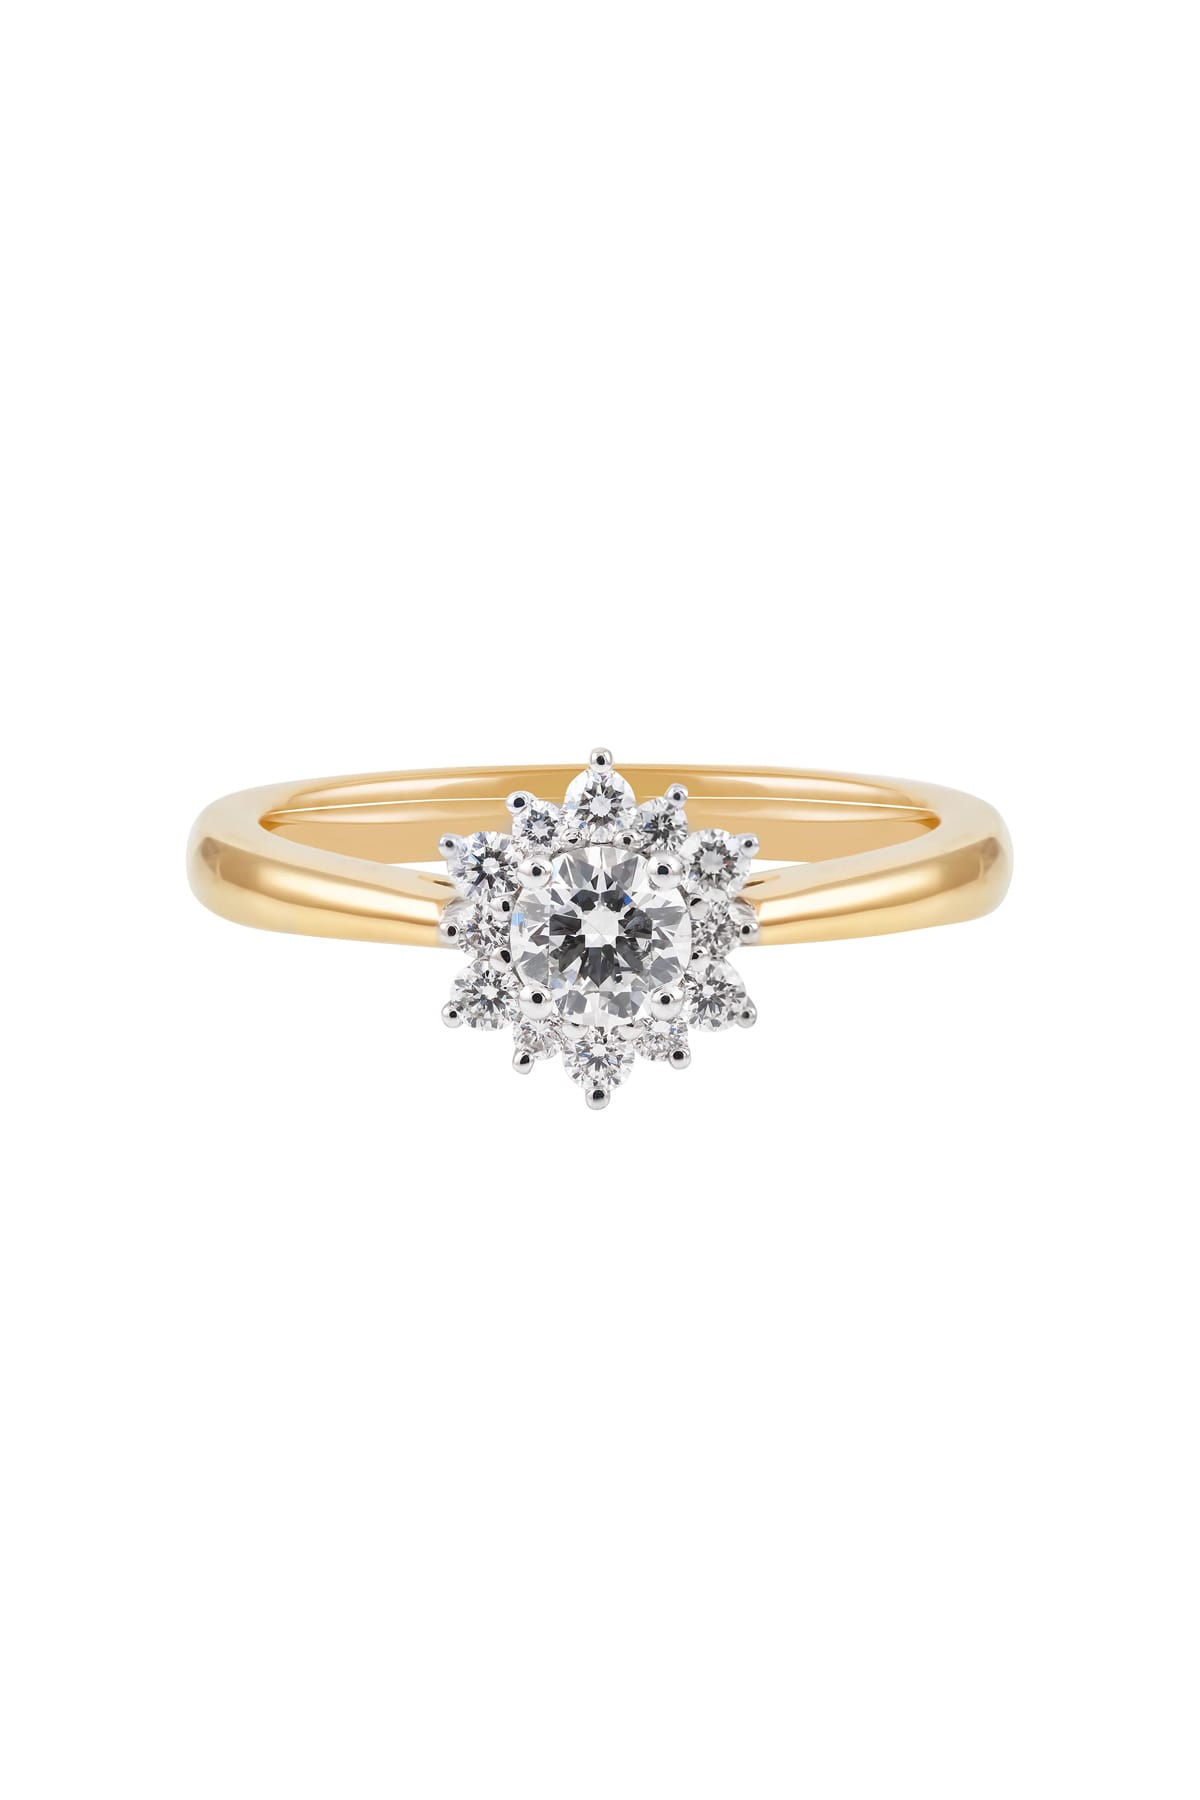 Diamond Set Ring set in 18ct Yellow and White Gold available at LeGassick Diamonds and Jewellery Gold Coast, Australia.